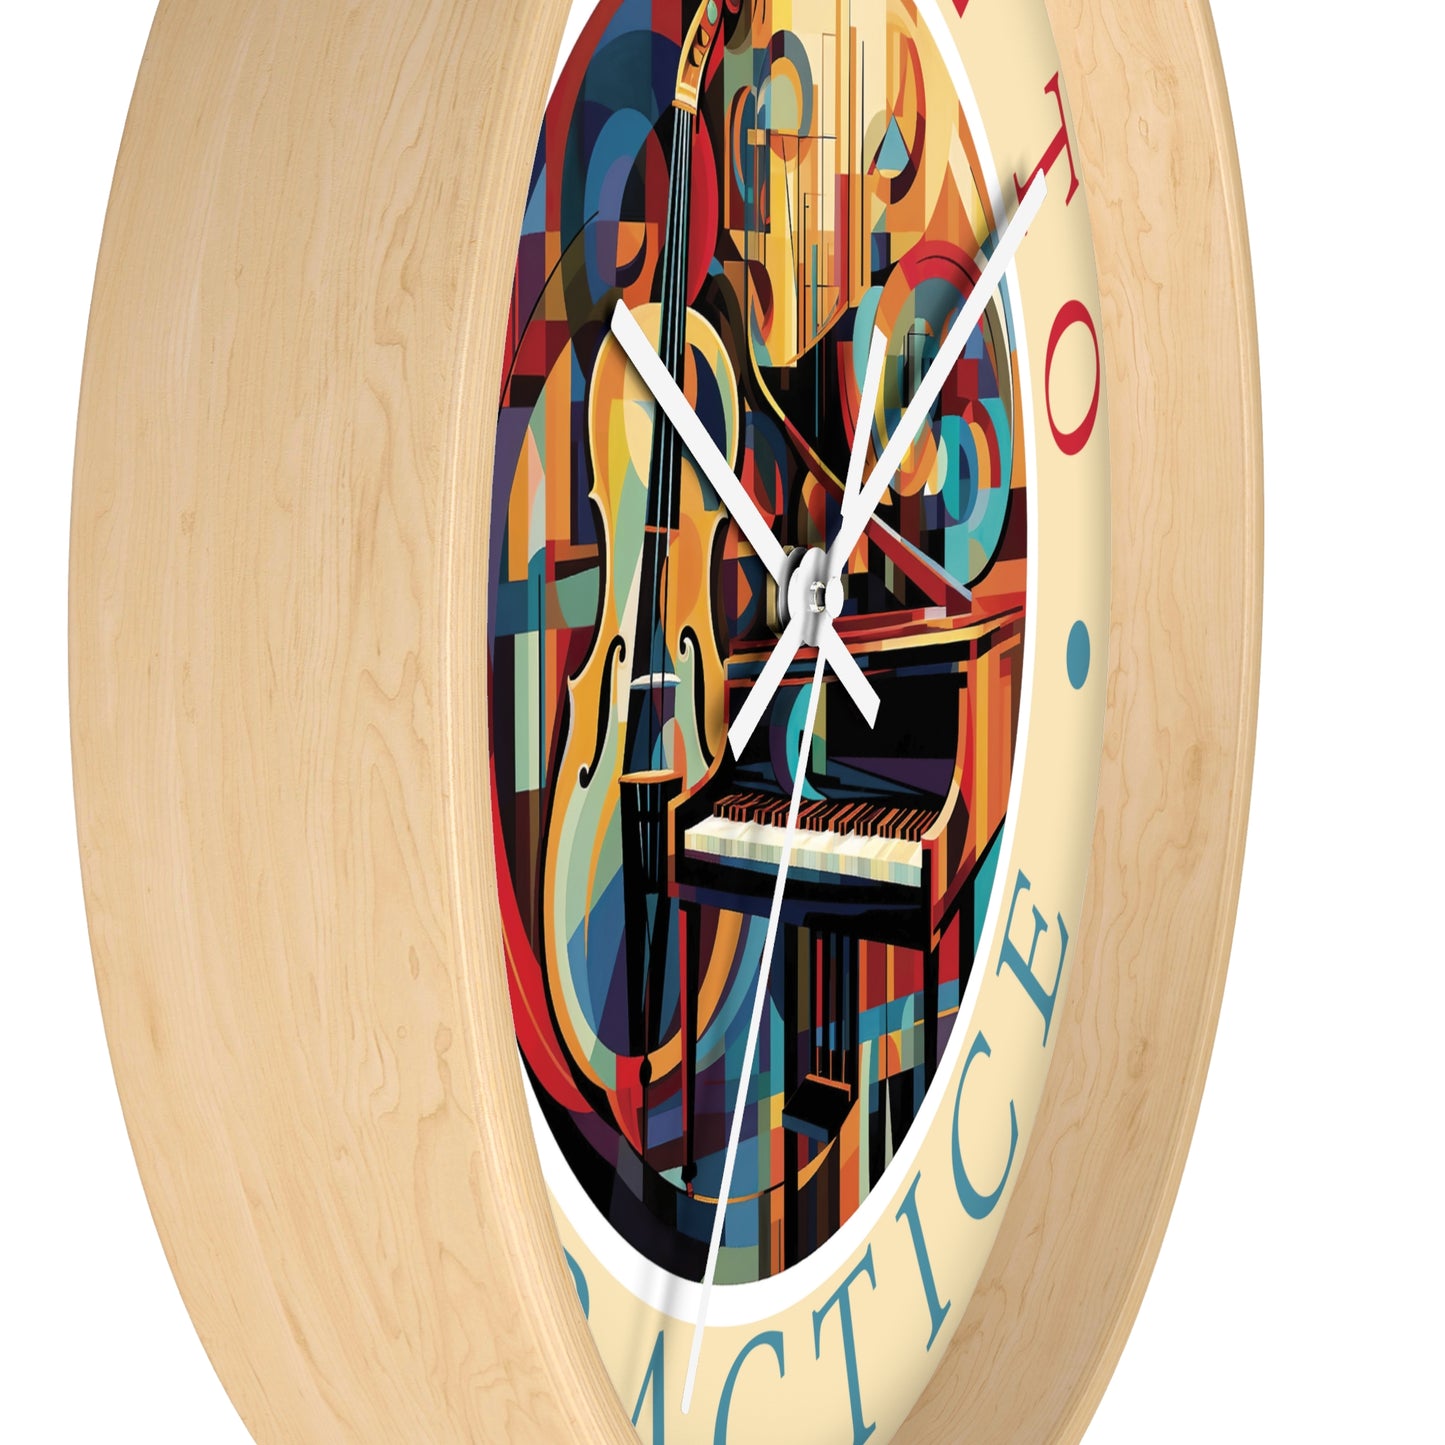 It's TIME to PRACTICE 10" Wall Clock, piano/cello Cubism style artwork, 2" frame in black, white or wood, plexiglass